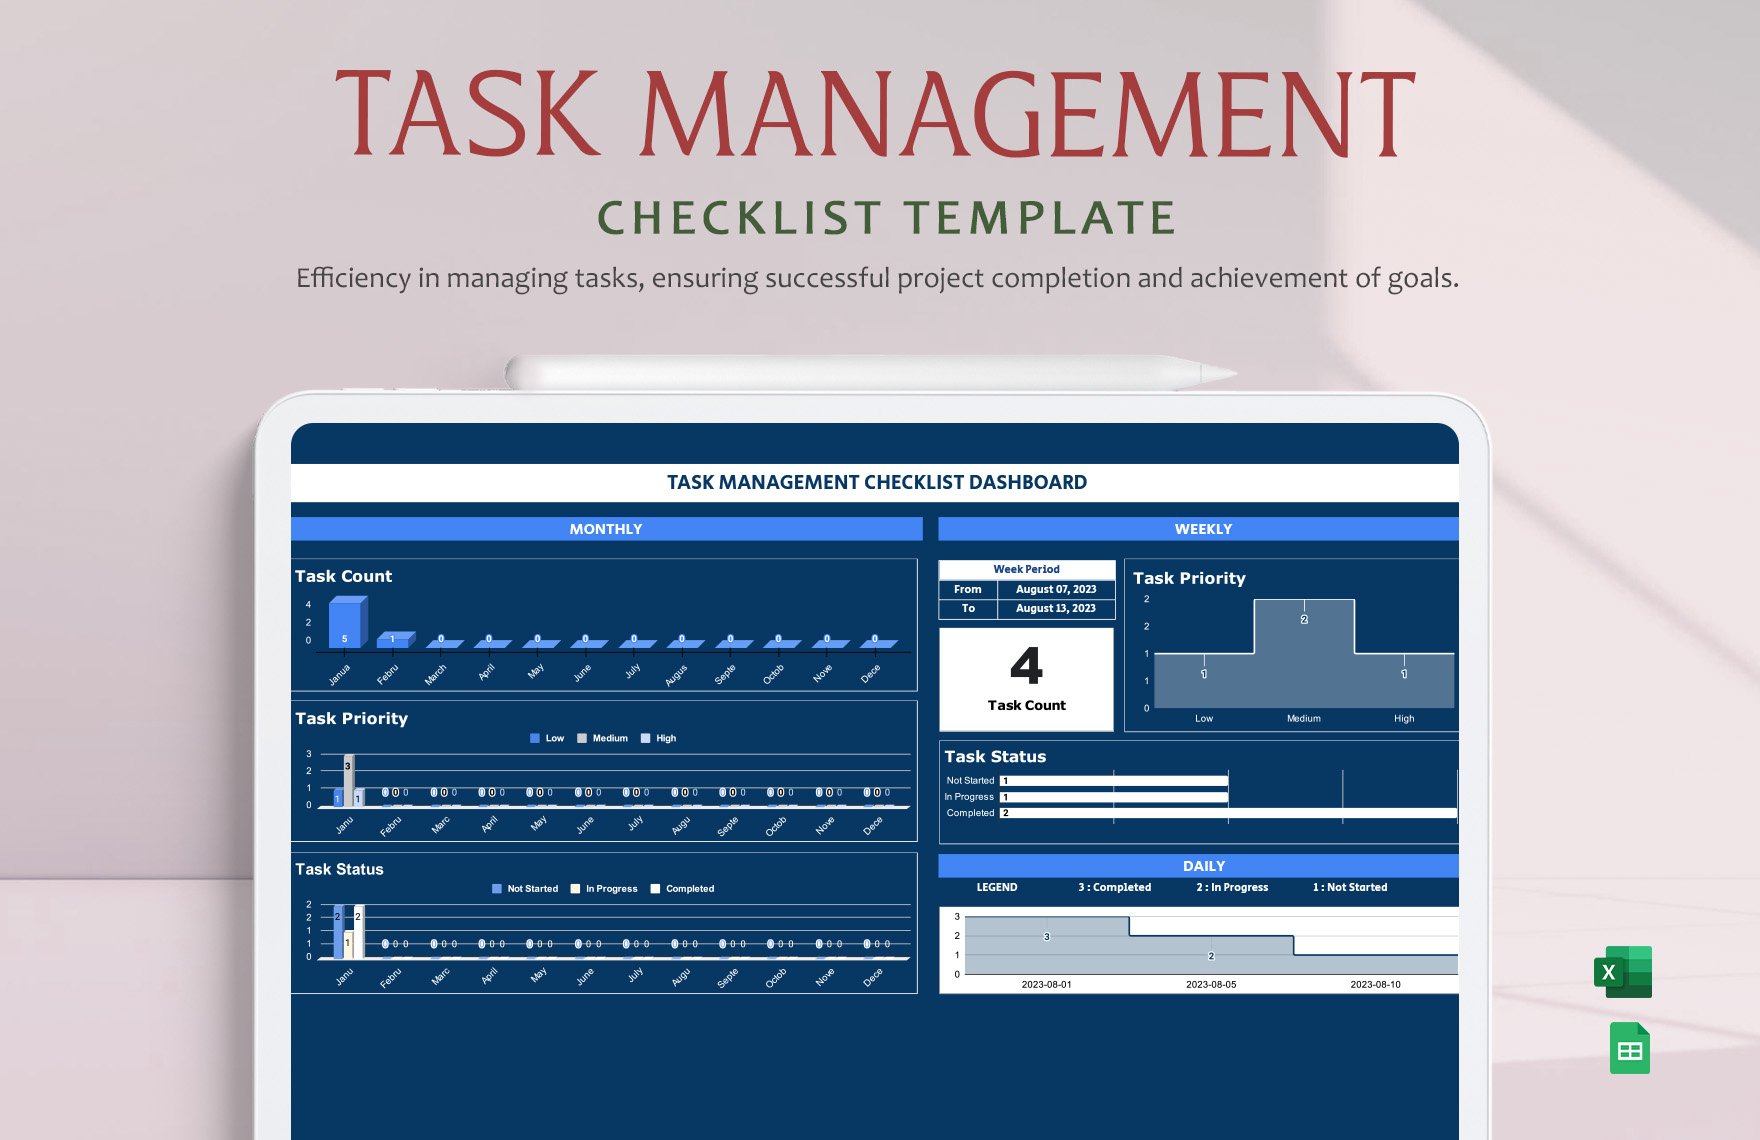 Free Task Management Checklist Template in Excel, Google Sheets